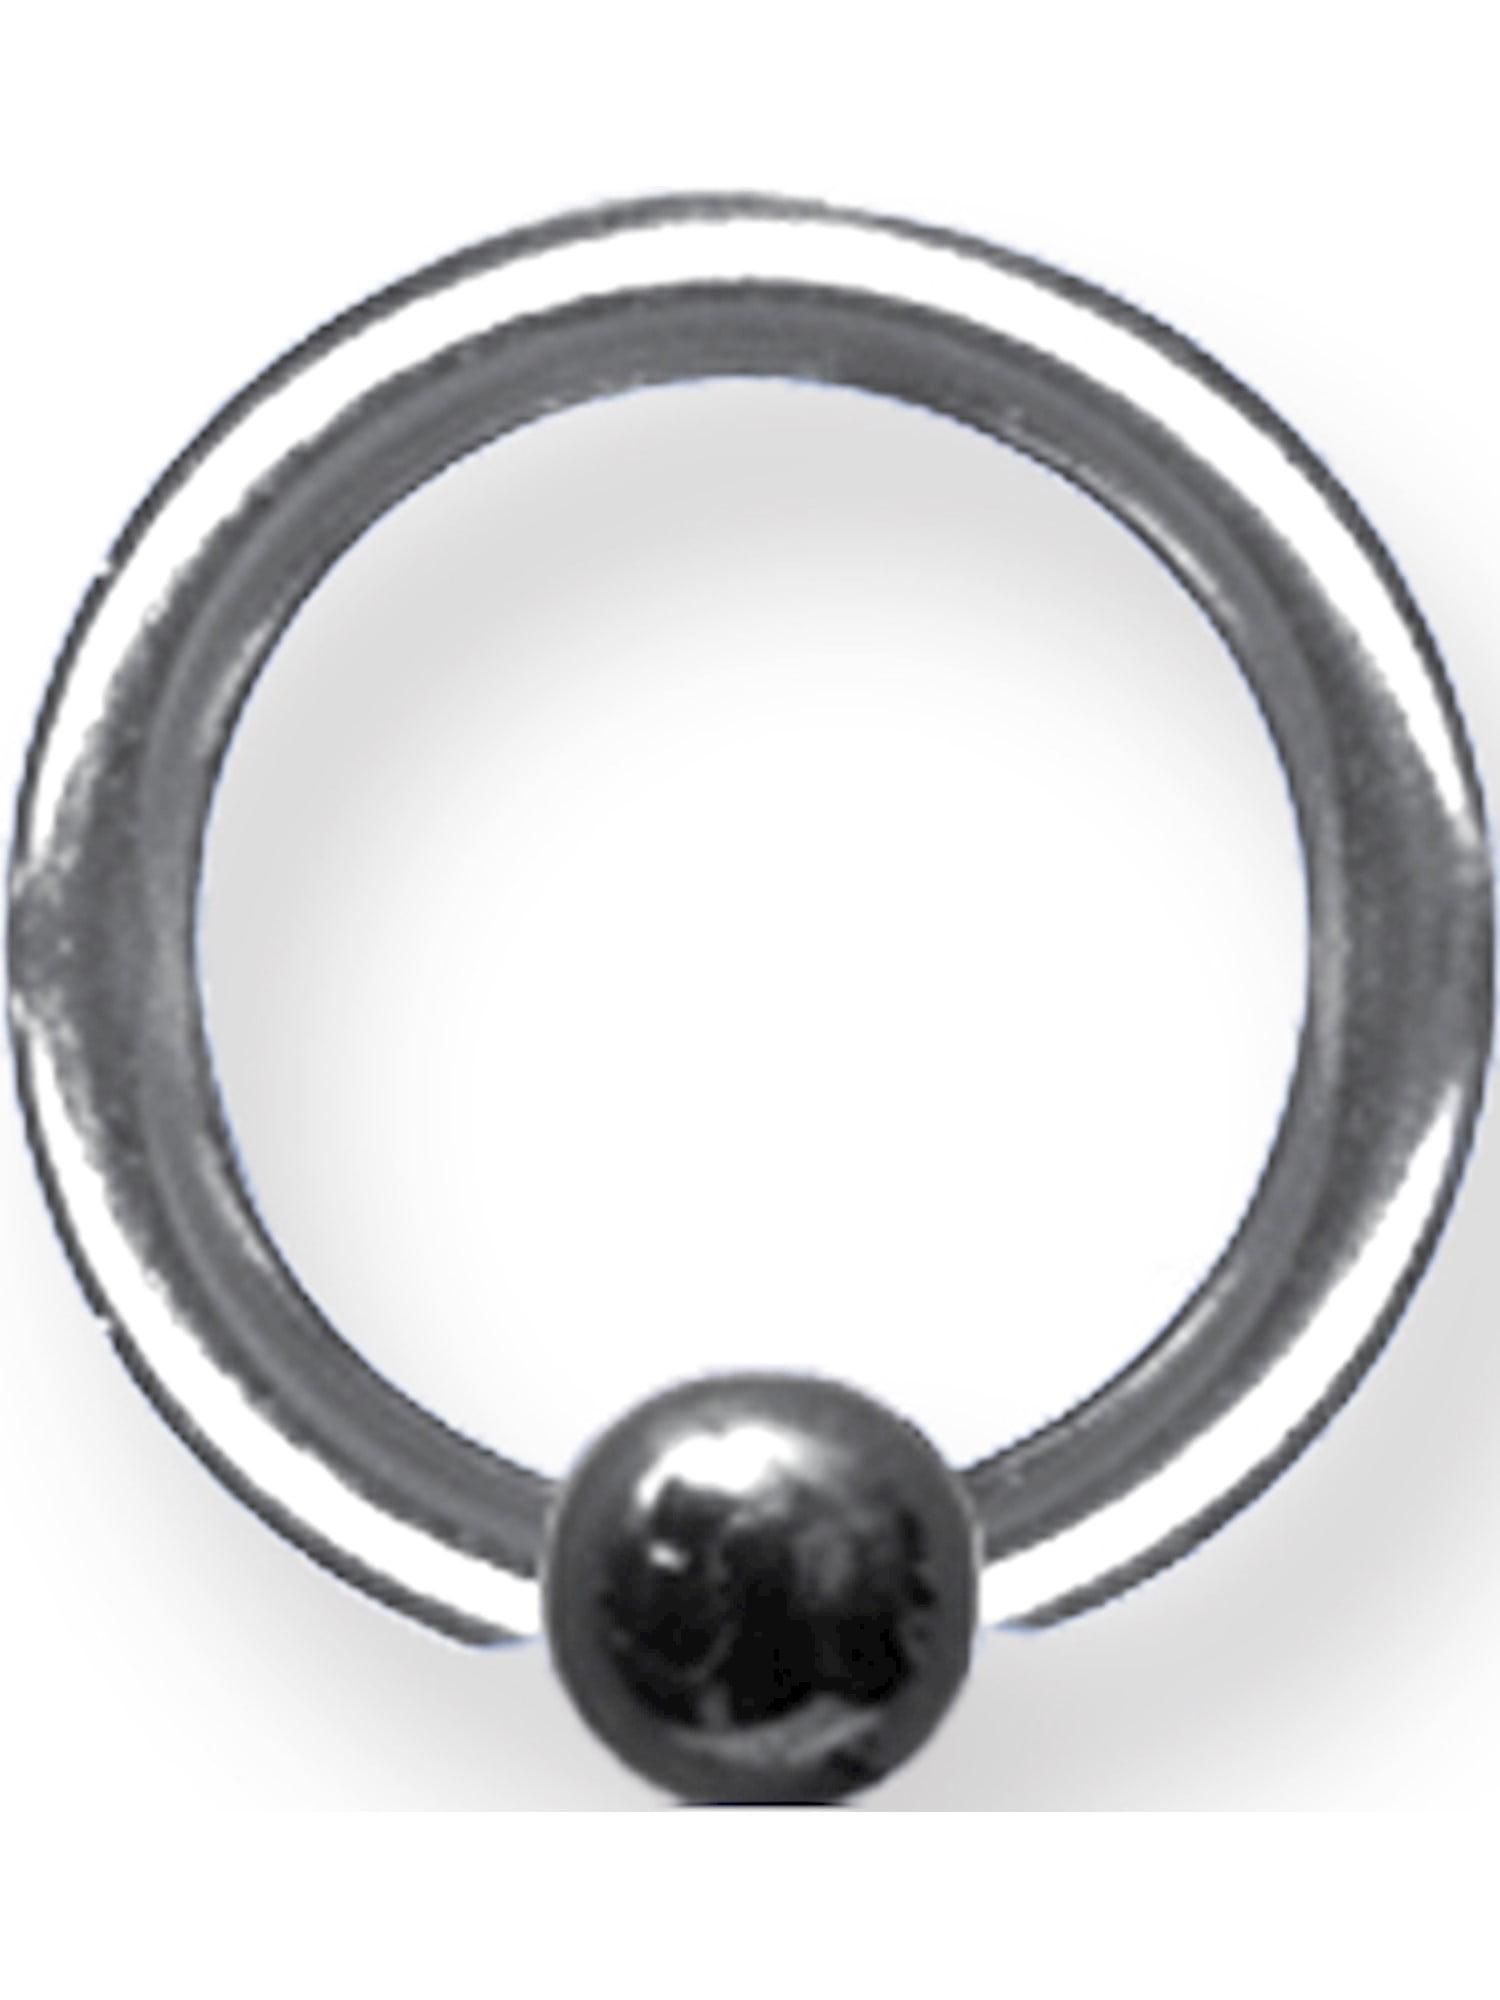 1/2 Dia w 4mm Captive Ball Coba Jewelry by Sweet Pea Solid Titanium Captive 12G 13mm 2mm